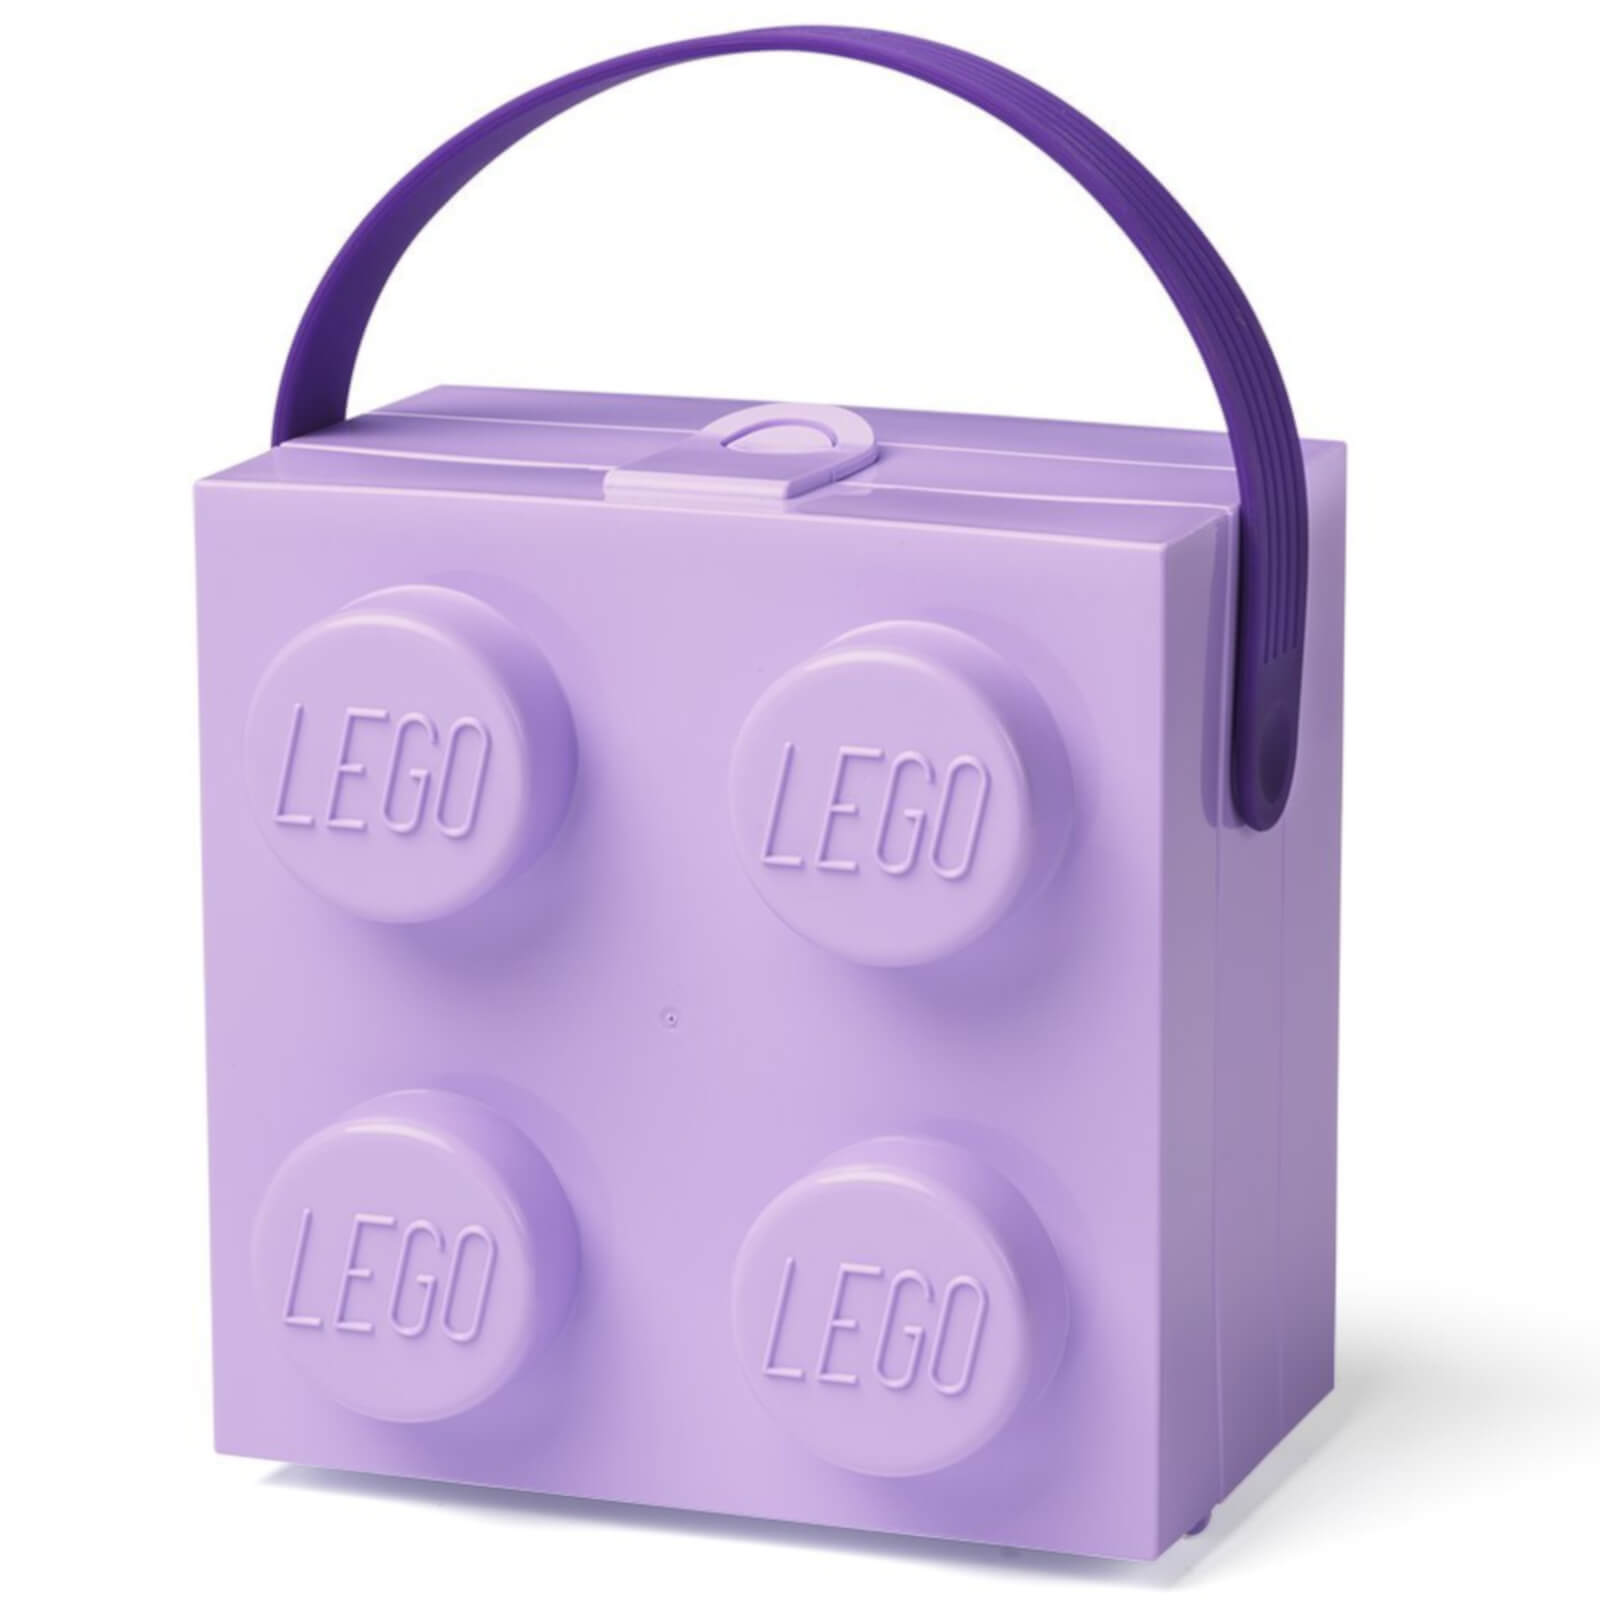 LEGO Lunch Box with Handle - Lavender